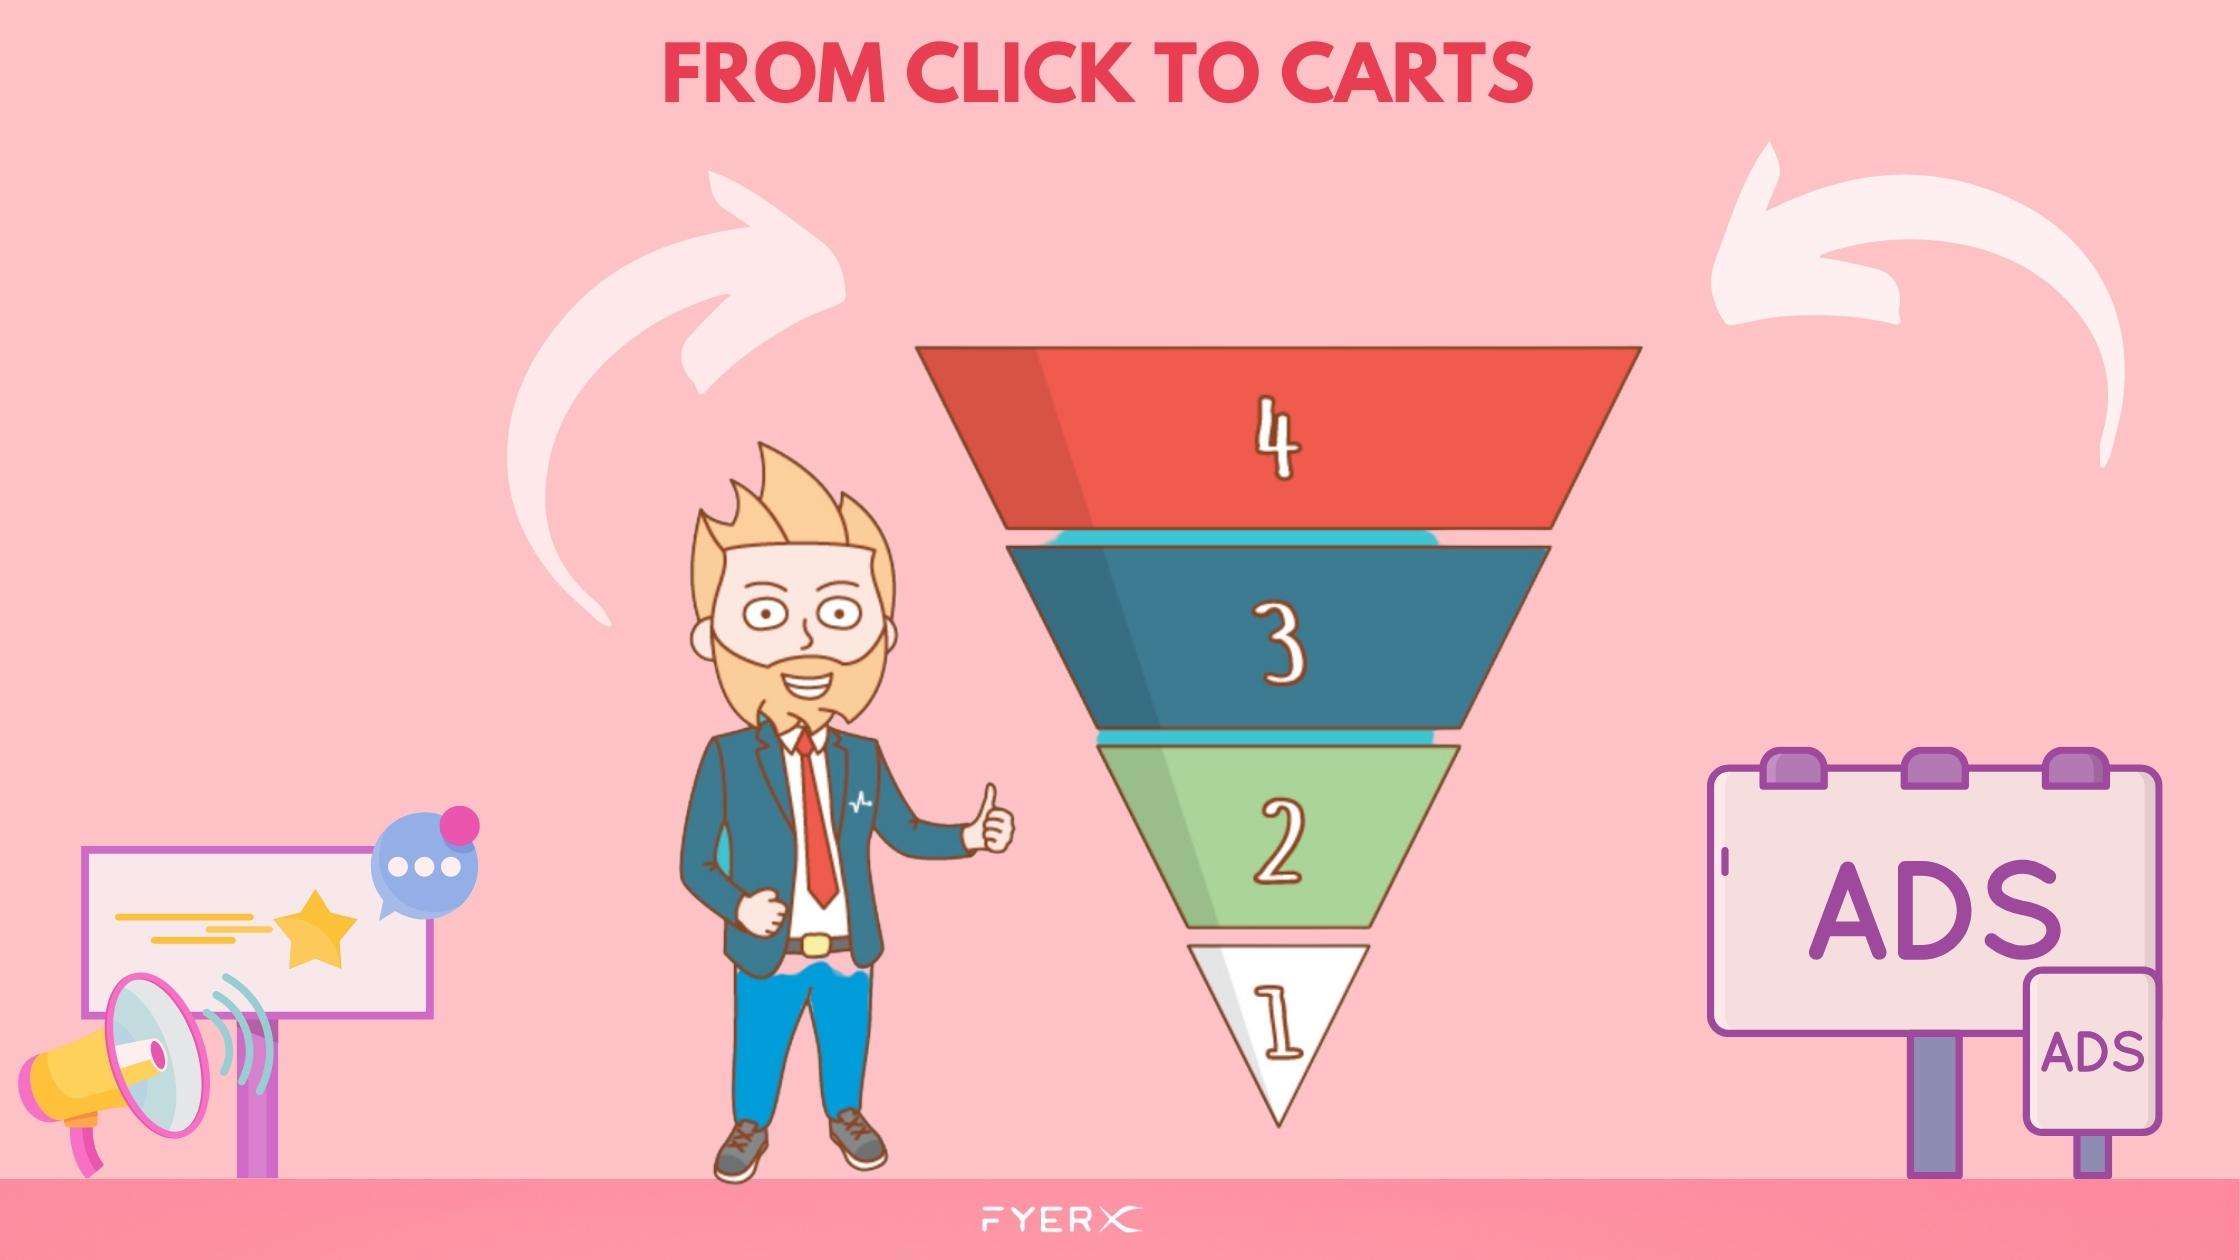 What Is the Marketing Funnel and How Does It Work?